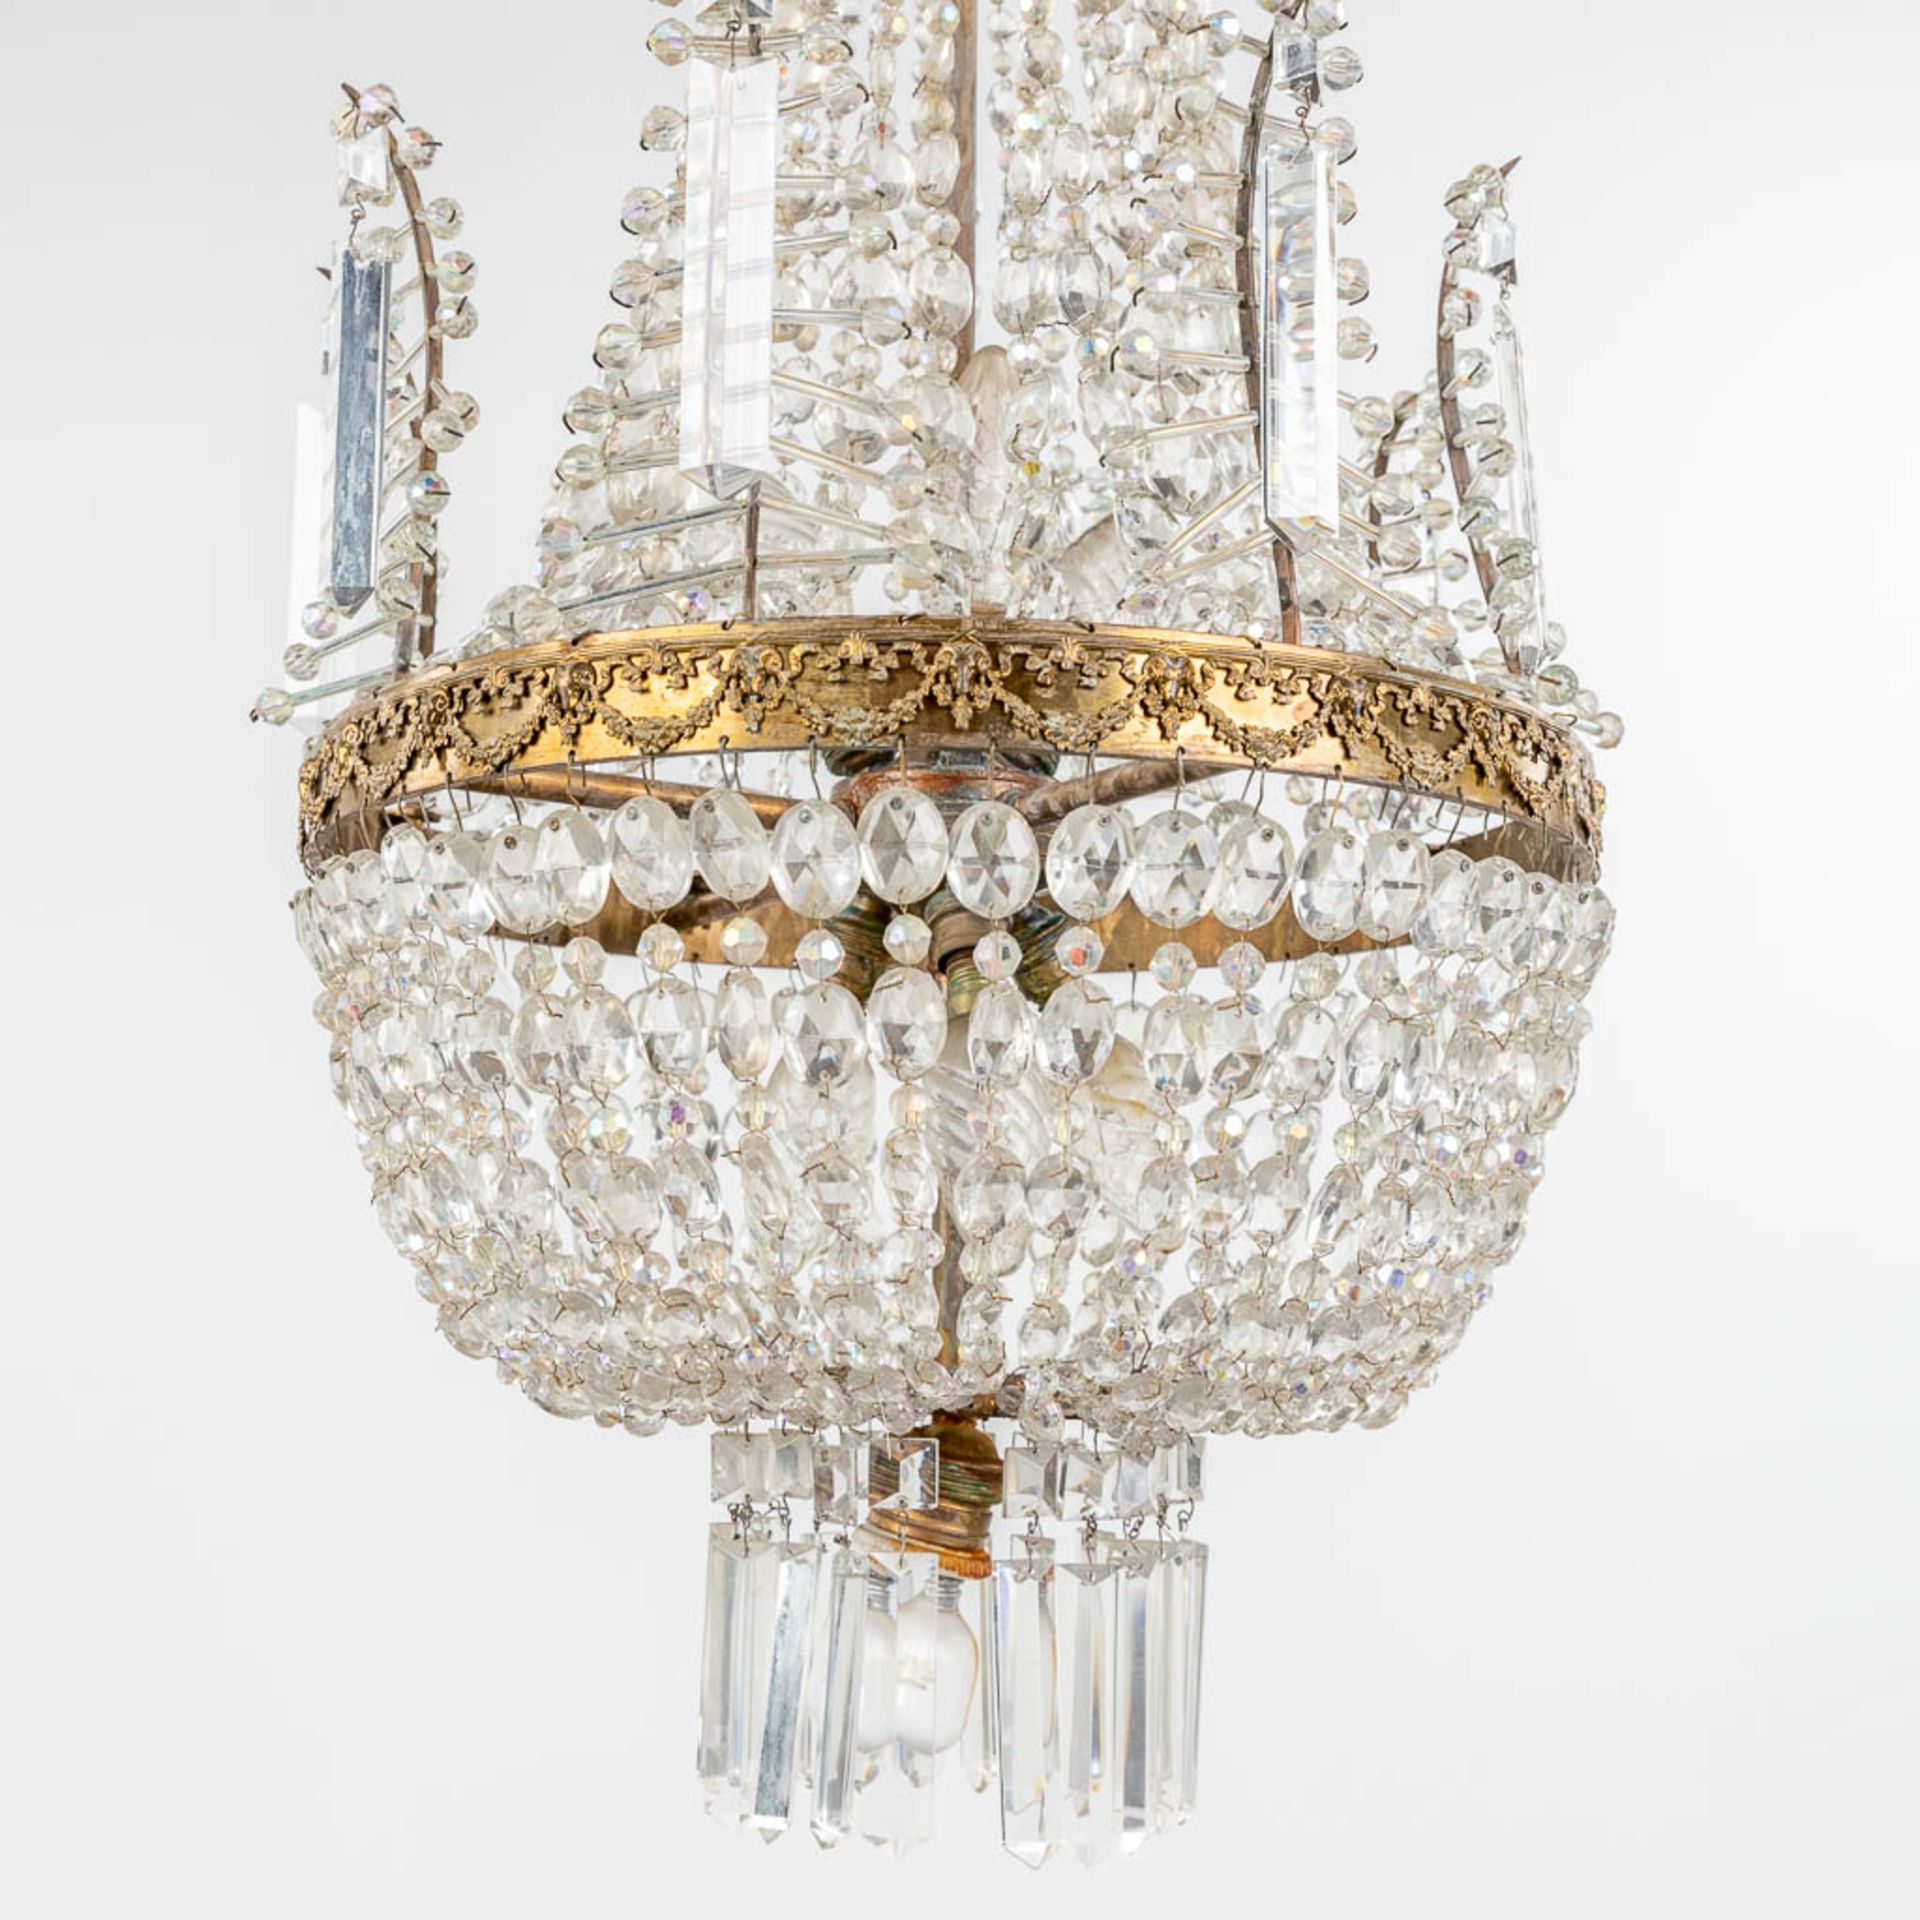 A chandelier 'Sac A Perles' decorated with tiny ram's heads. 20th century. (H: 83 x D: 42 cm) - Image 3 of 10